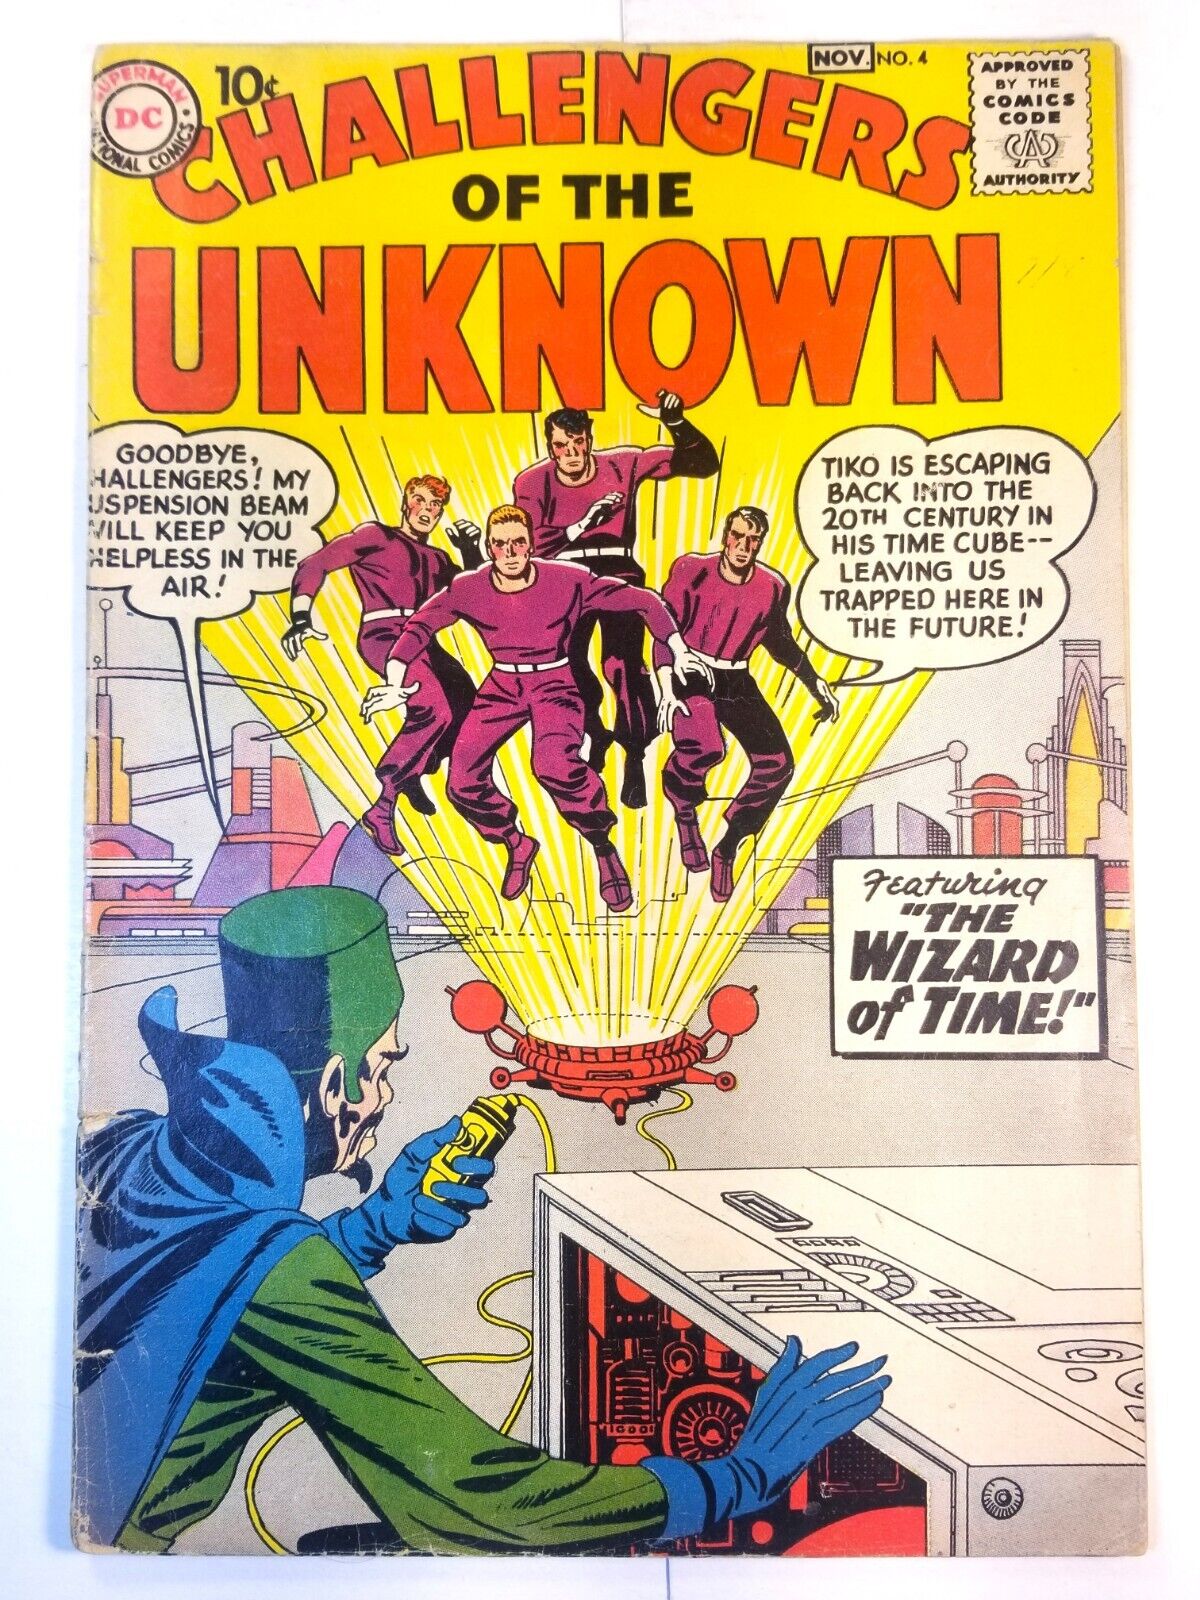 CHALLENGERS OF THE UNKNOWN #4 DC COMICS NOV. 1958 JACK KIRBY, WALLY WOOD VG- 3.5